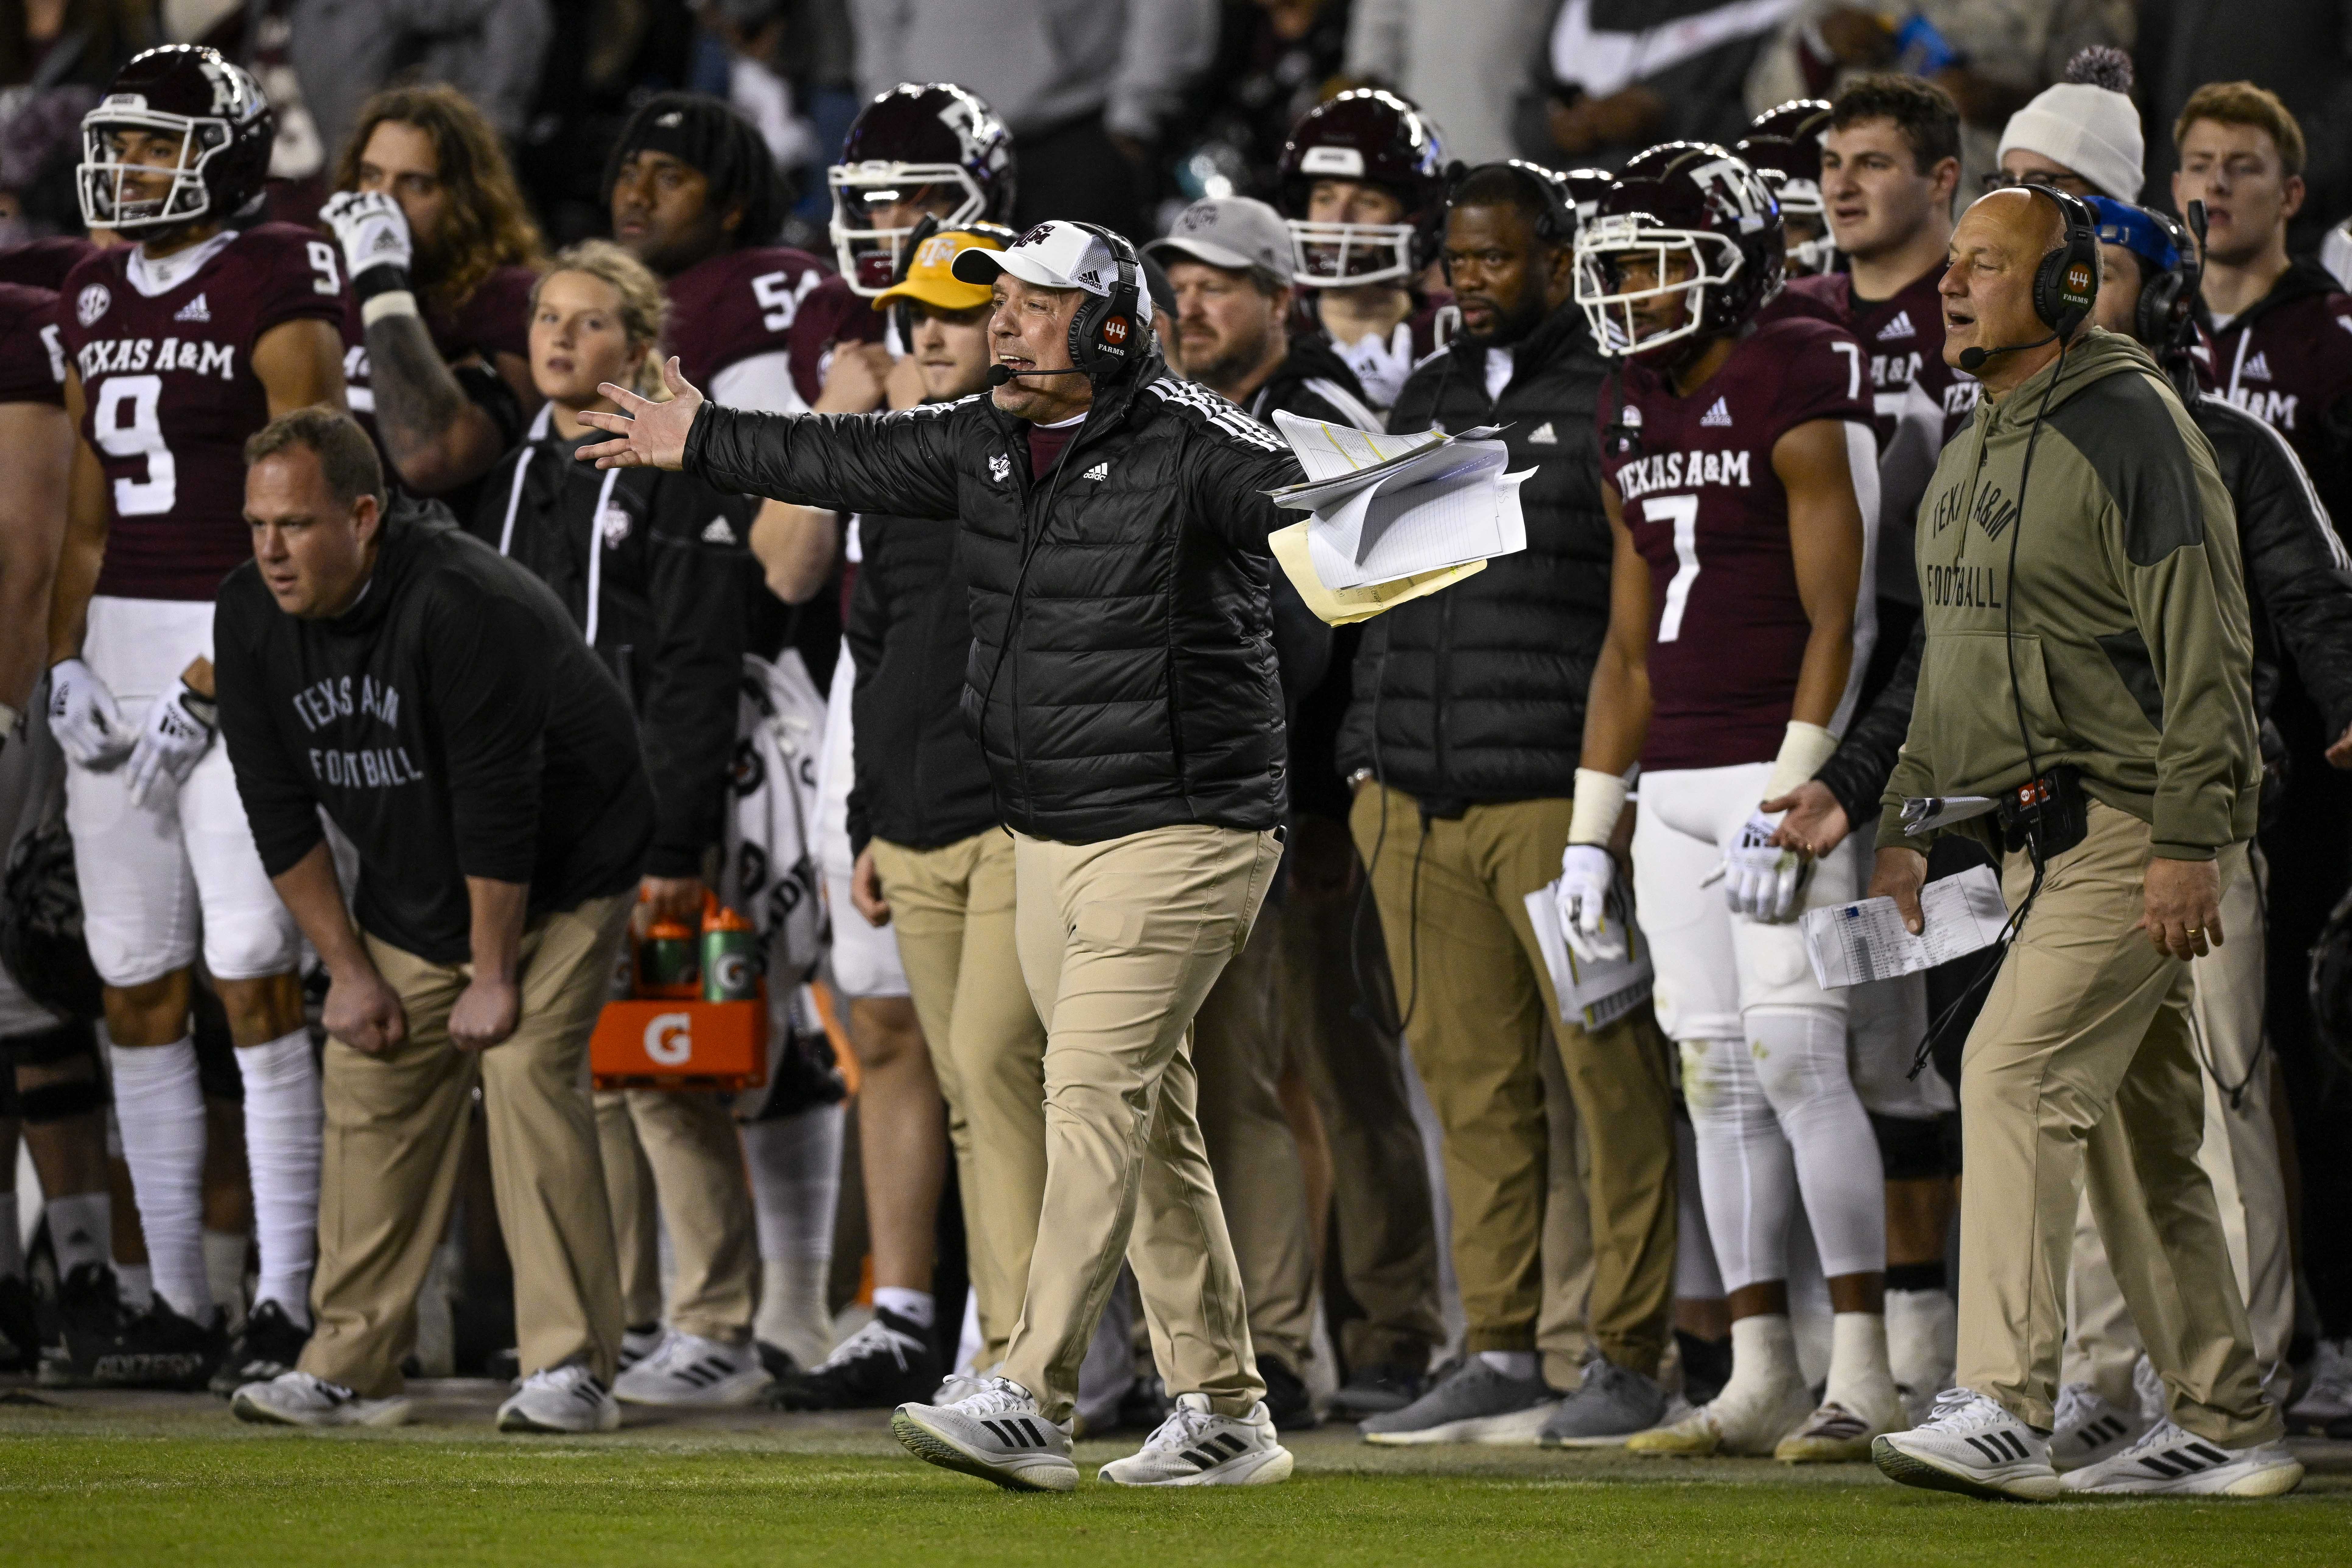 Sell, Sell, Sell? College Sports Wire’s Patrick Conn not buying the Aggies as 2023 contenders